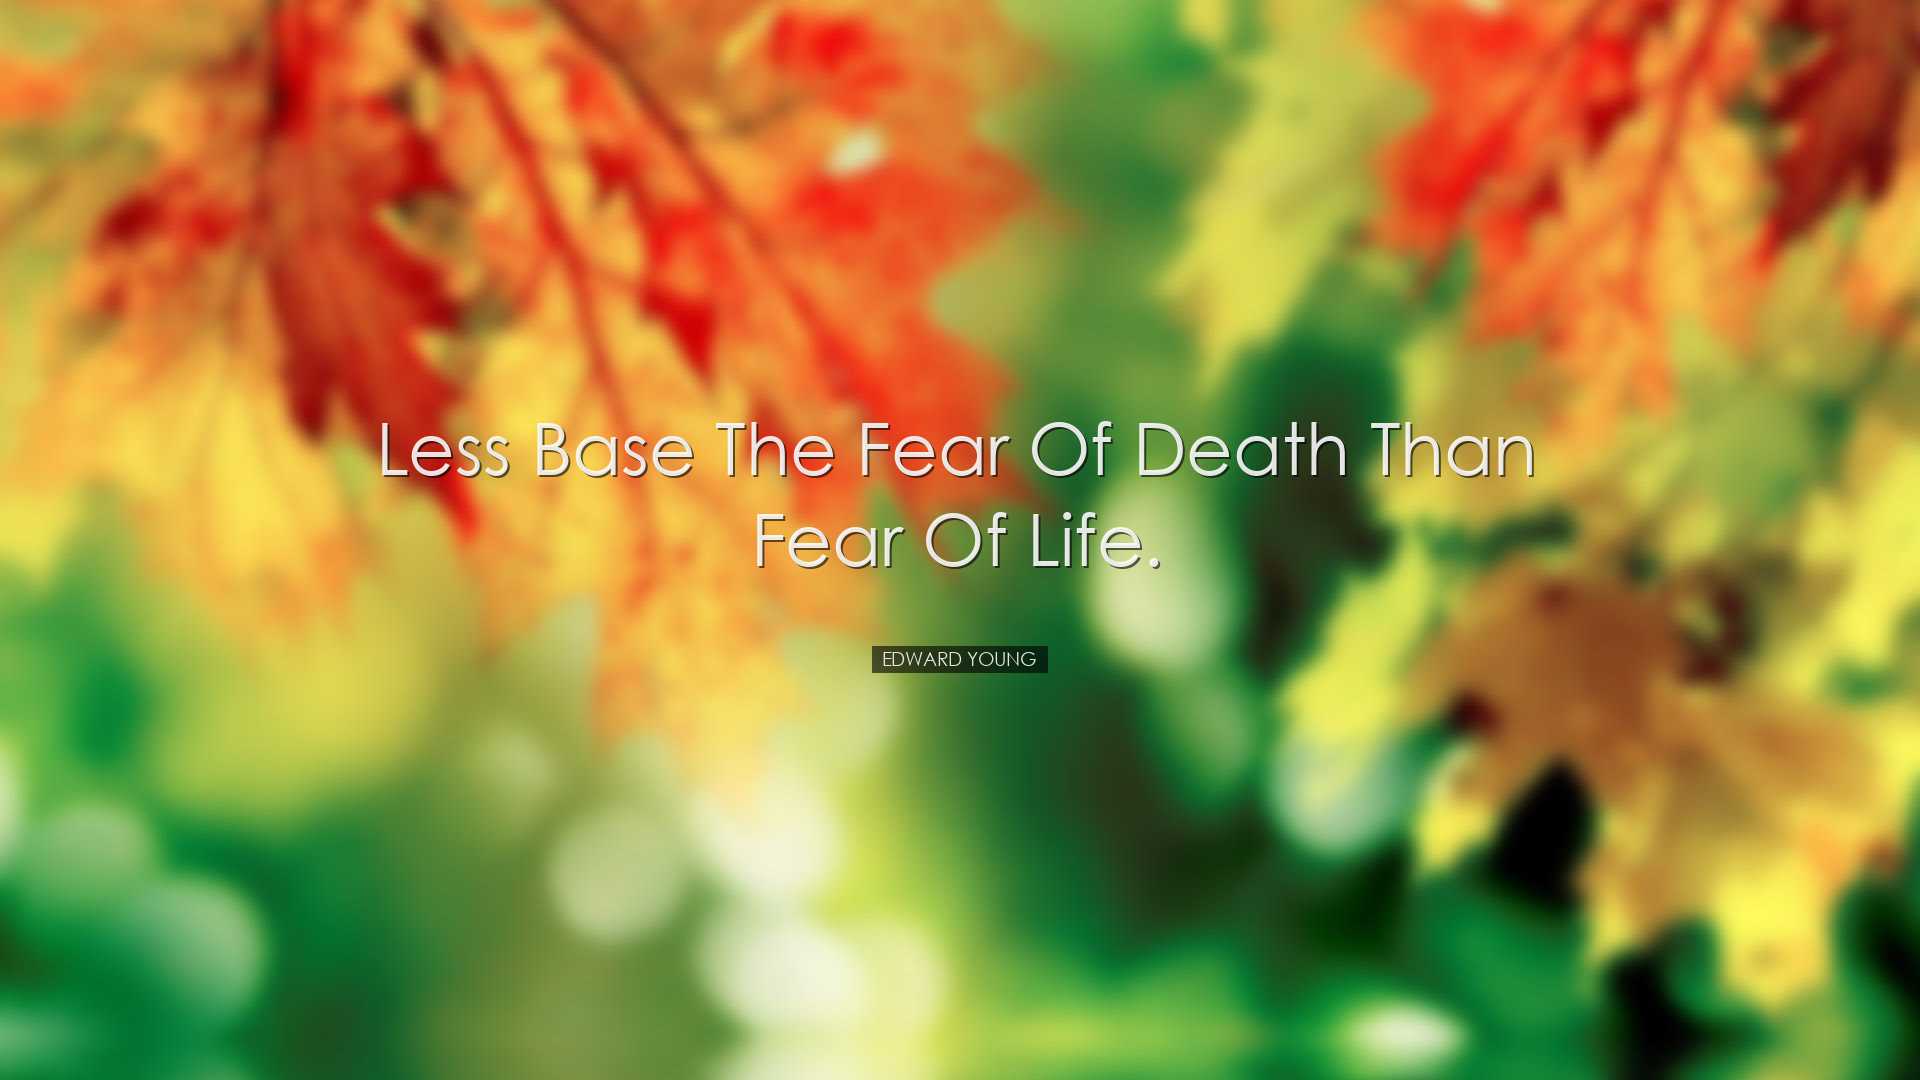 Less base the fear of death than fear of life. - Edward Young